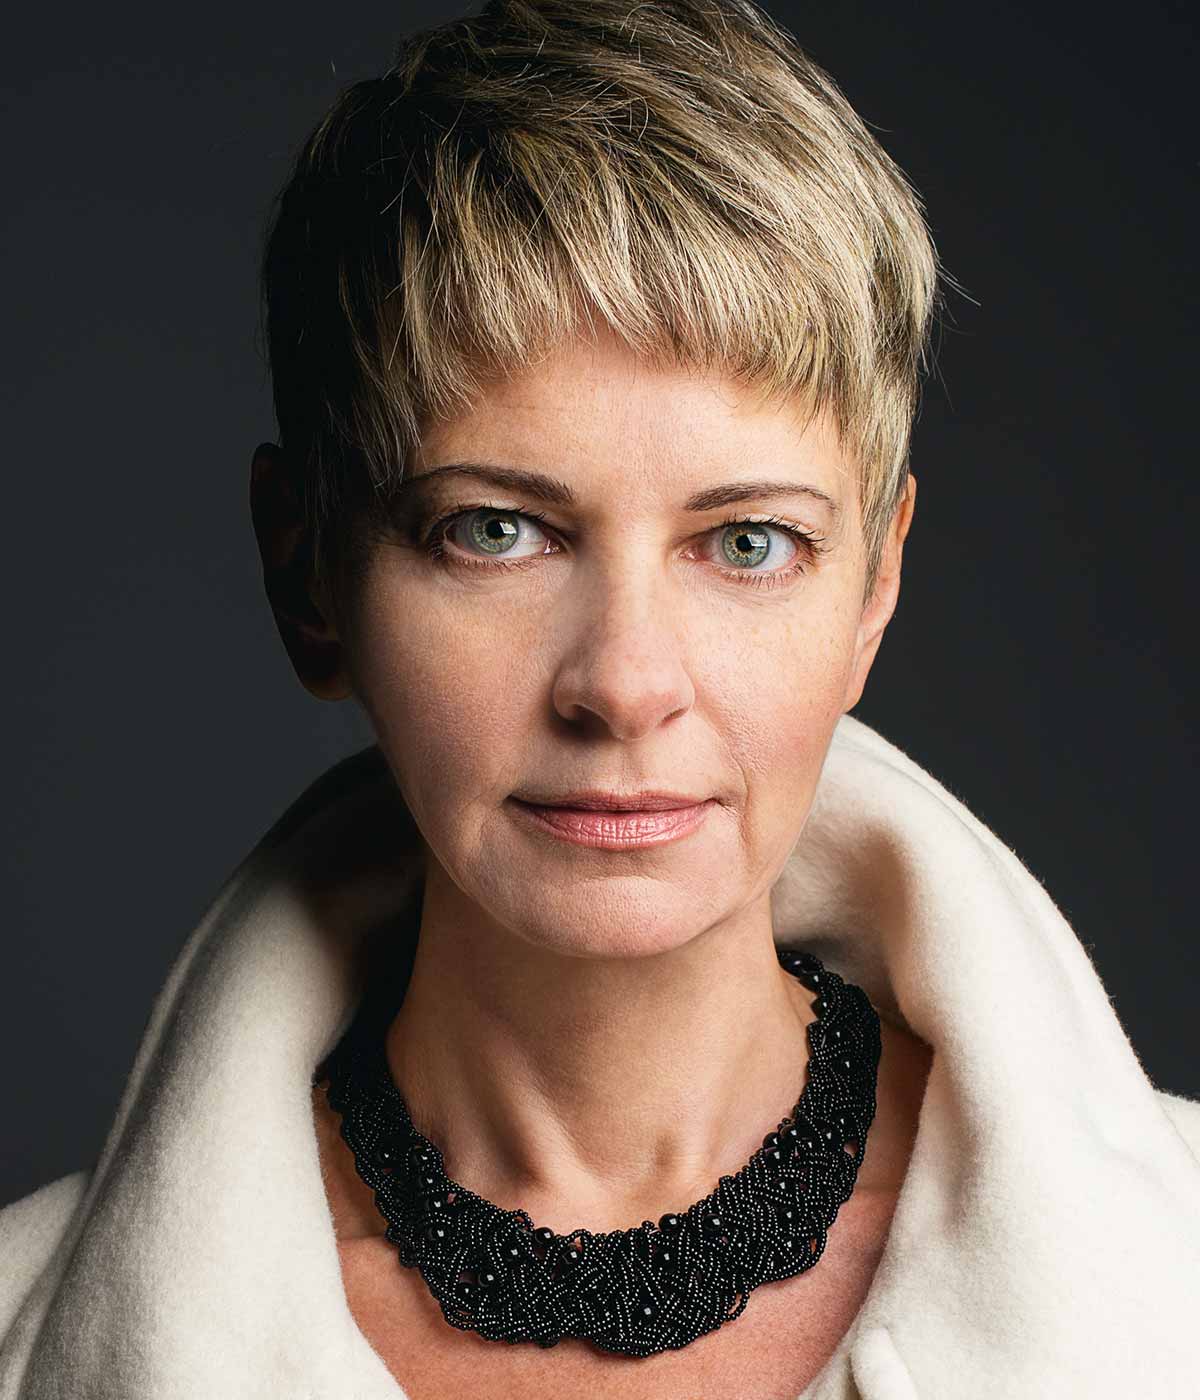 Pixie cut donna over 50